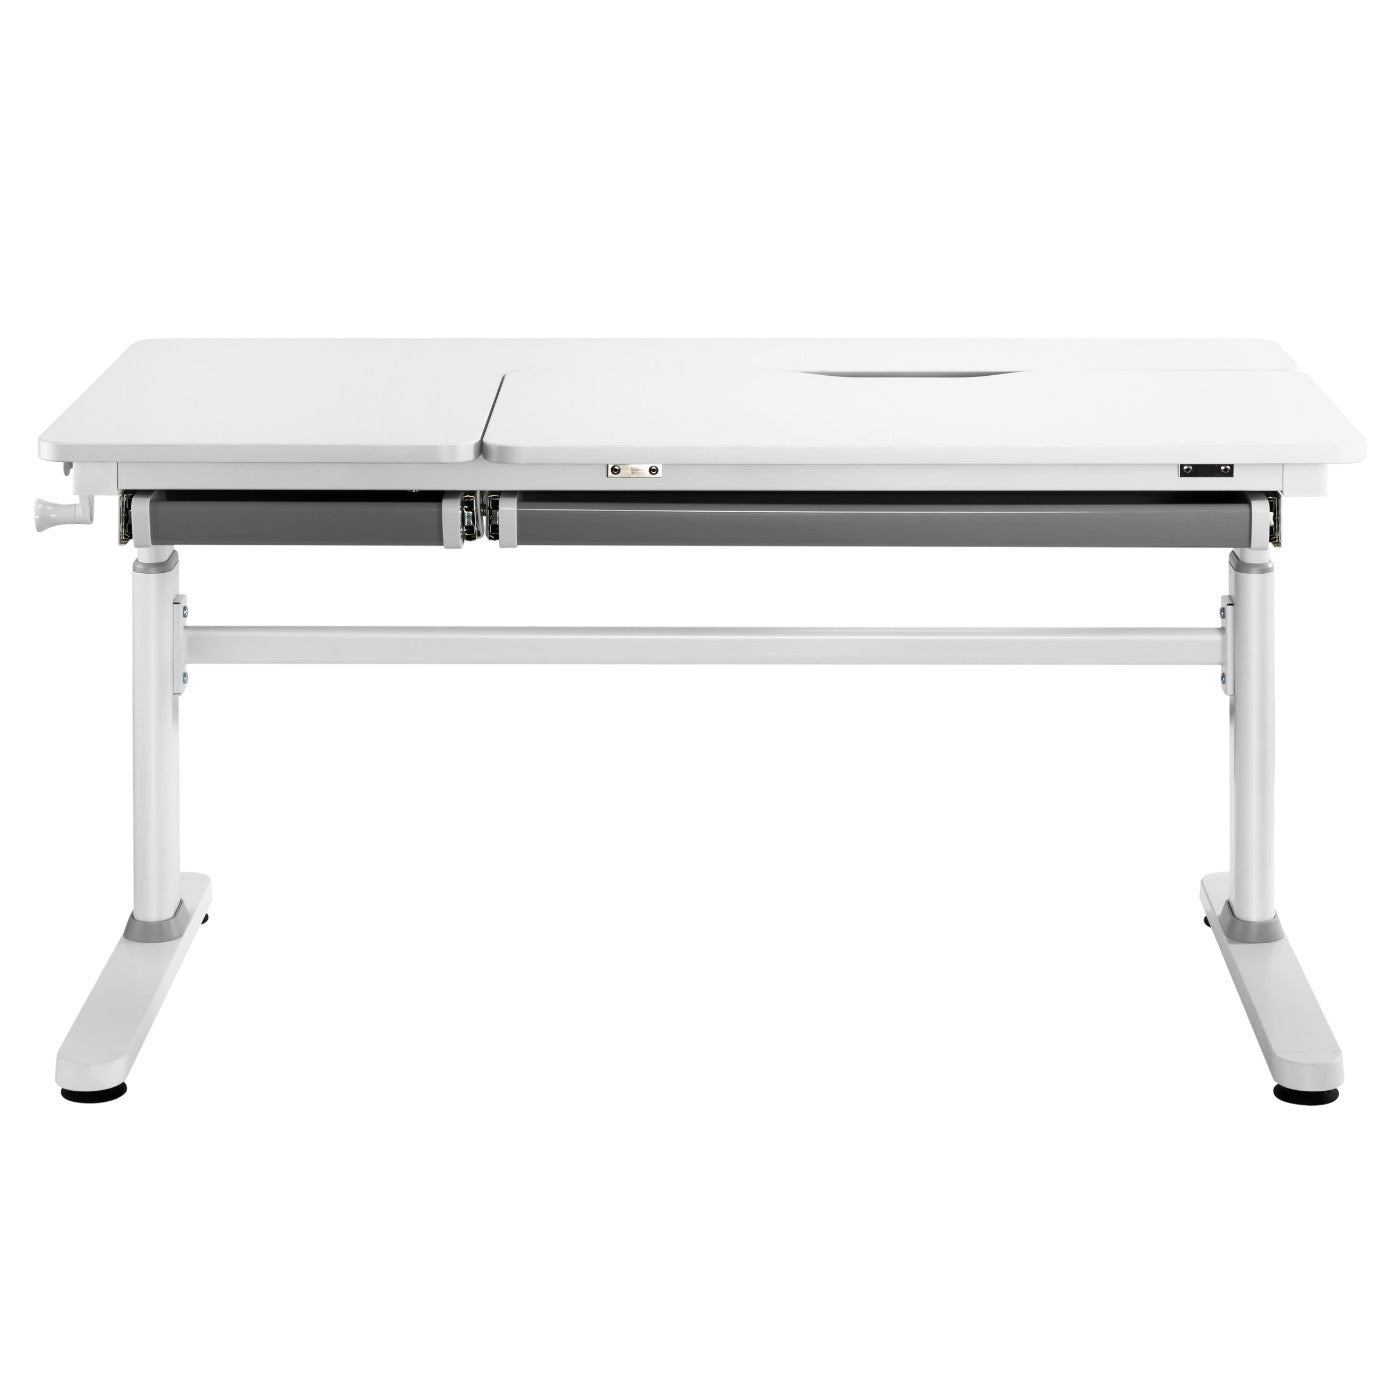 Ergo-Study-Table manual height adjustable children desk with adjustable table top, White